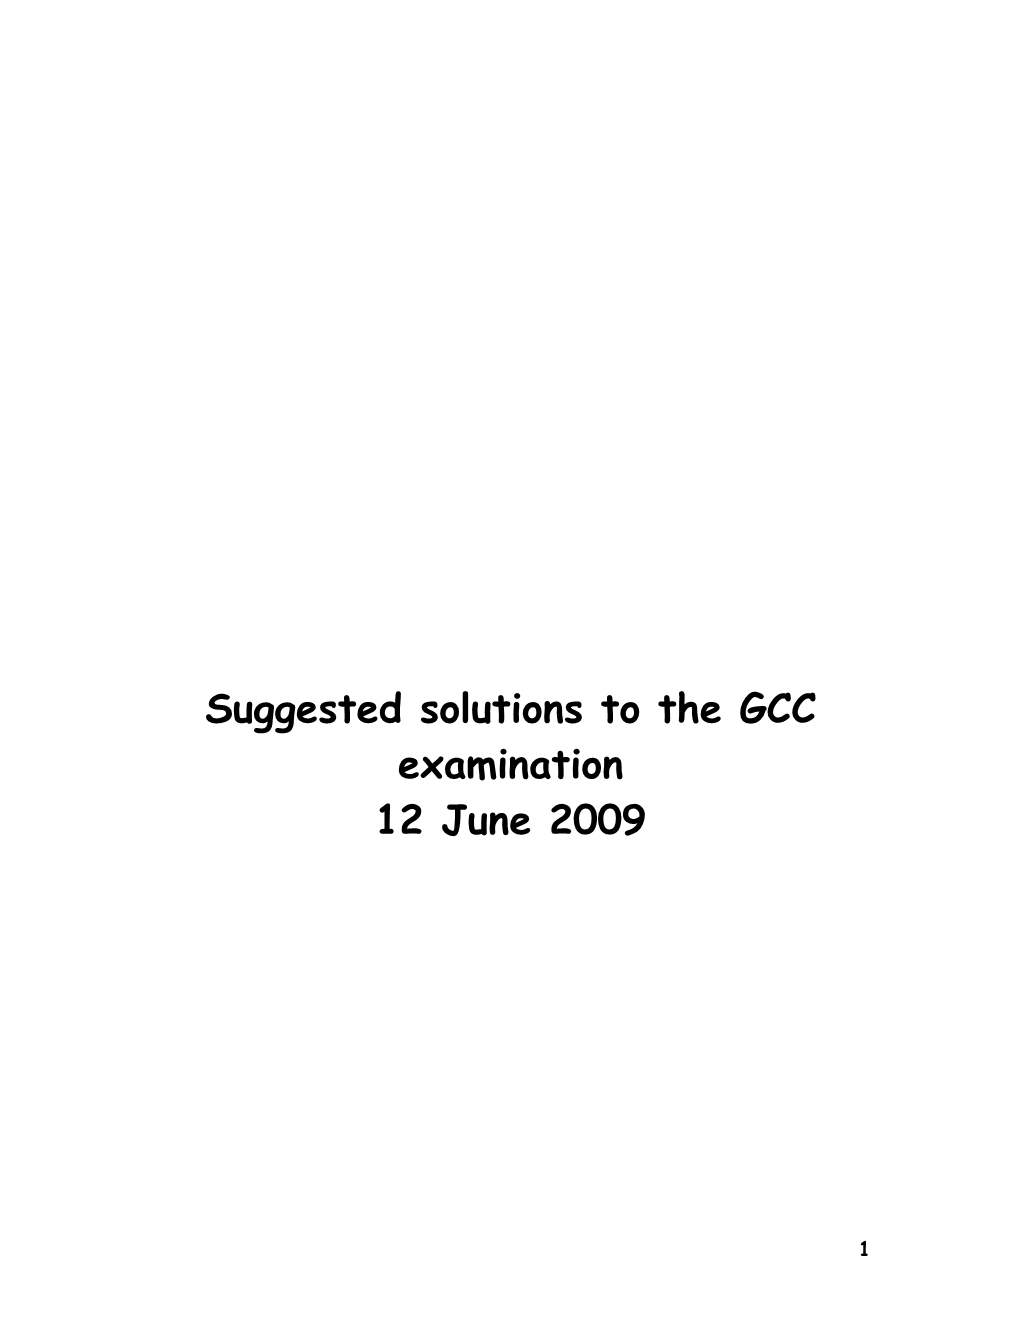 Suggested Solutions to the GCC Examination